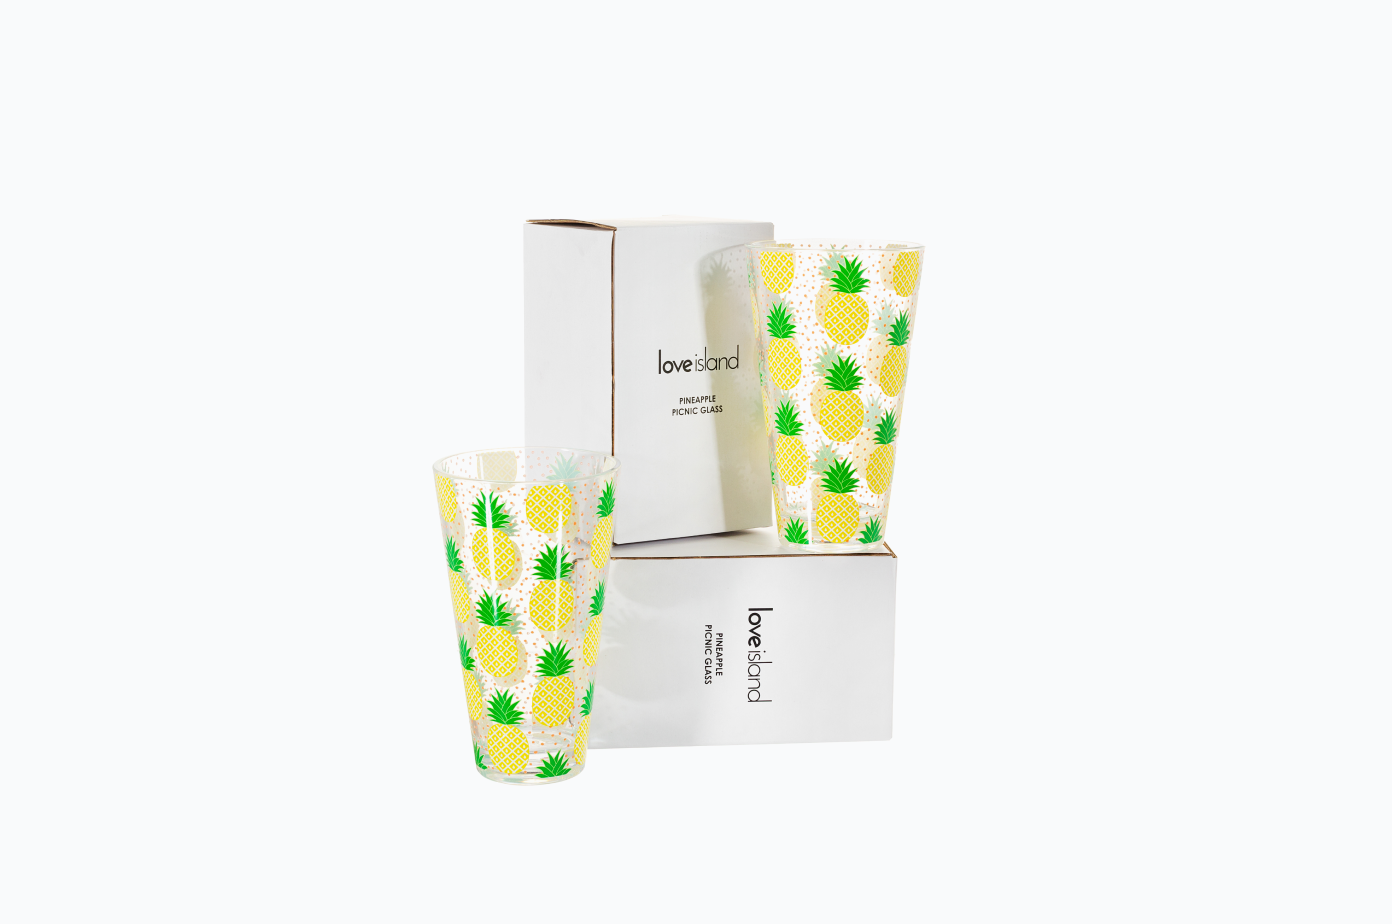 Official Love Island Pineapple Picnic Glasses - Set of 2